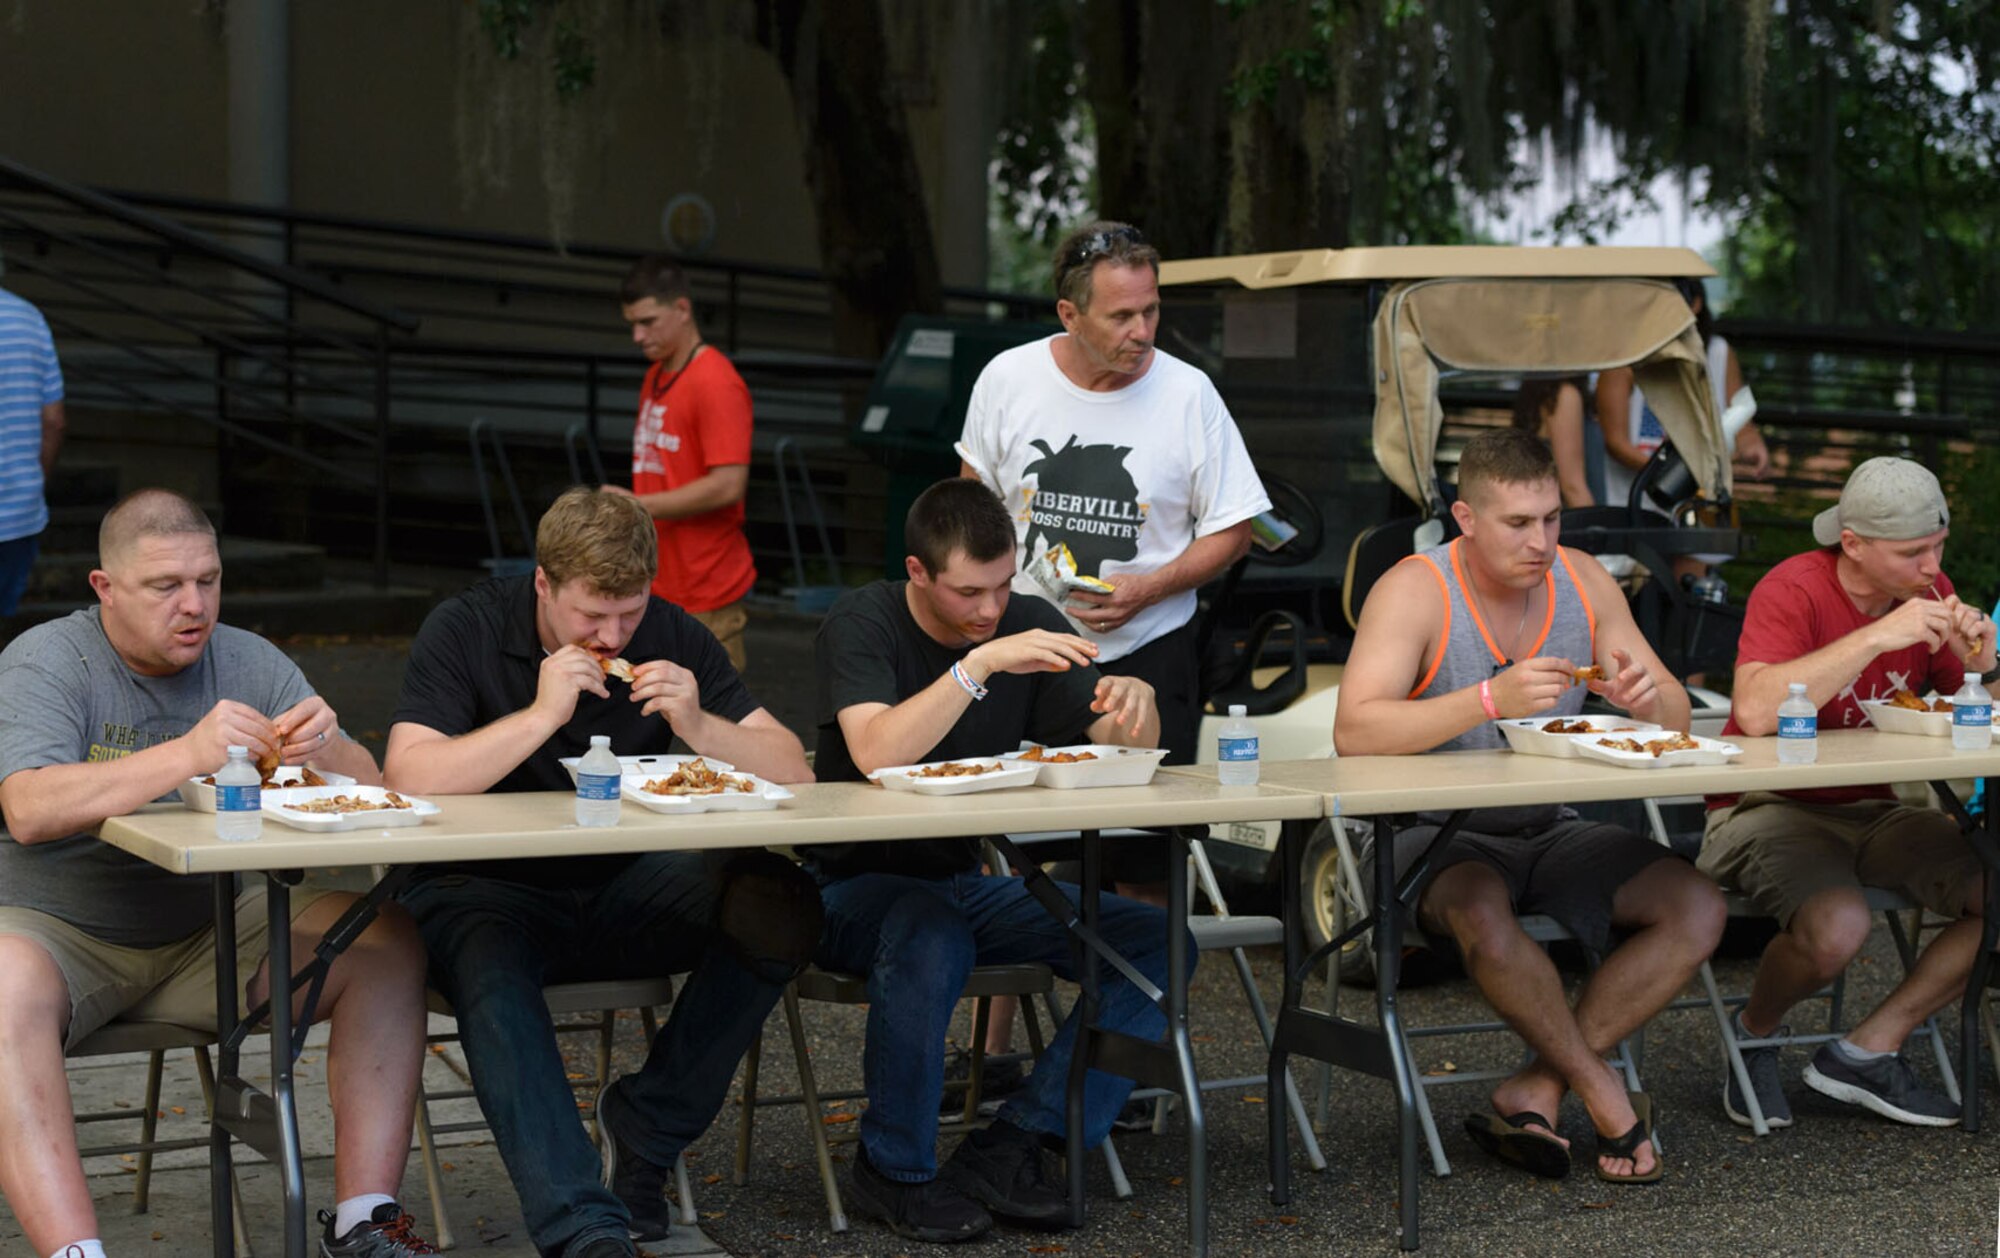 Keesler personnel and families participate in the hot wings eating competition during Freedom Fest at Marina Park on Keesler Air Force Base, Mississippi, June 30, 2018. The event included carnival rides, a burger cook-off, a watermelon eating competition and a fireworks display. (U.S. Air Force photo by Andre’ Askew)